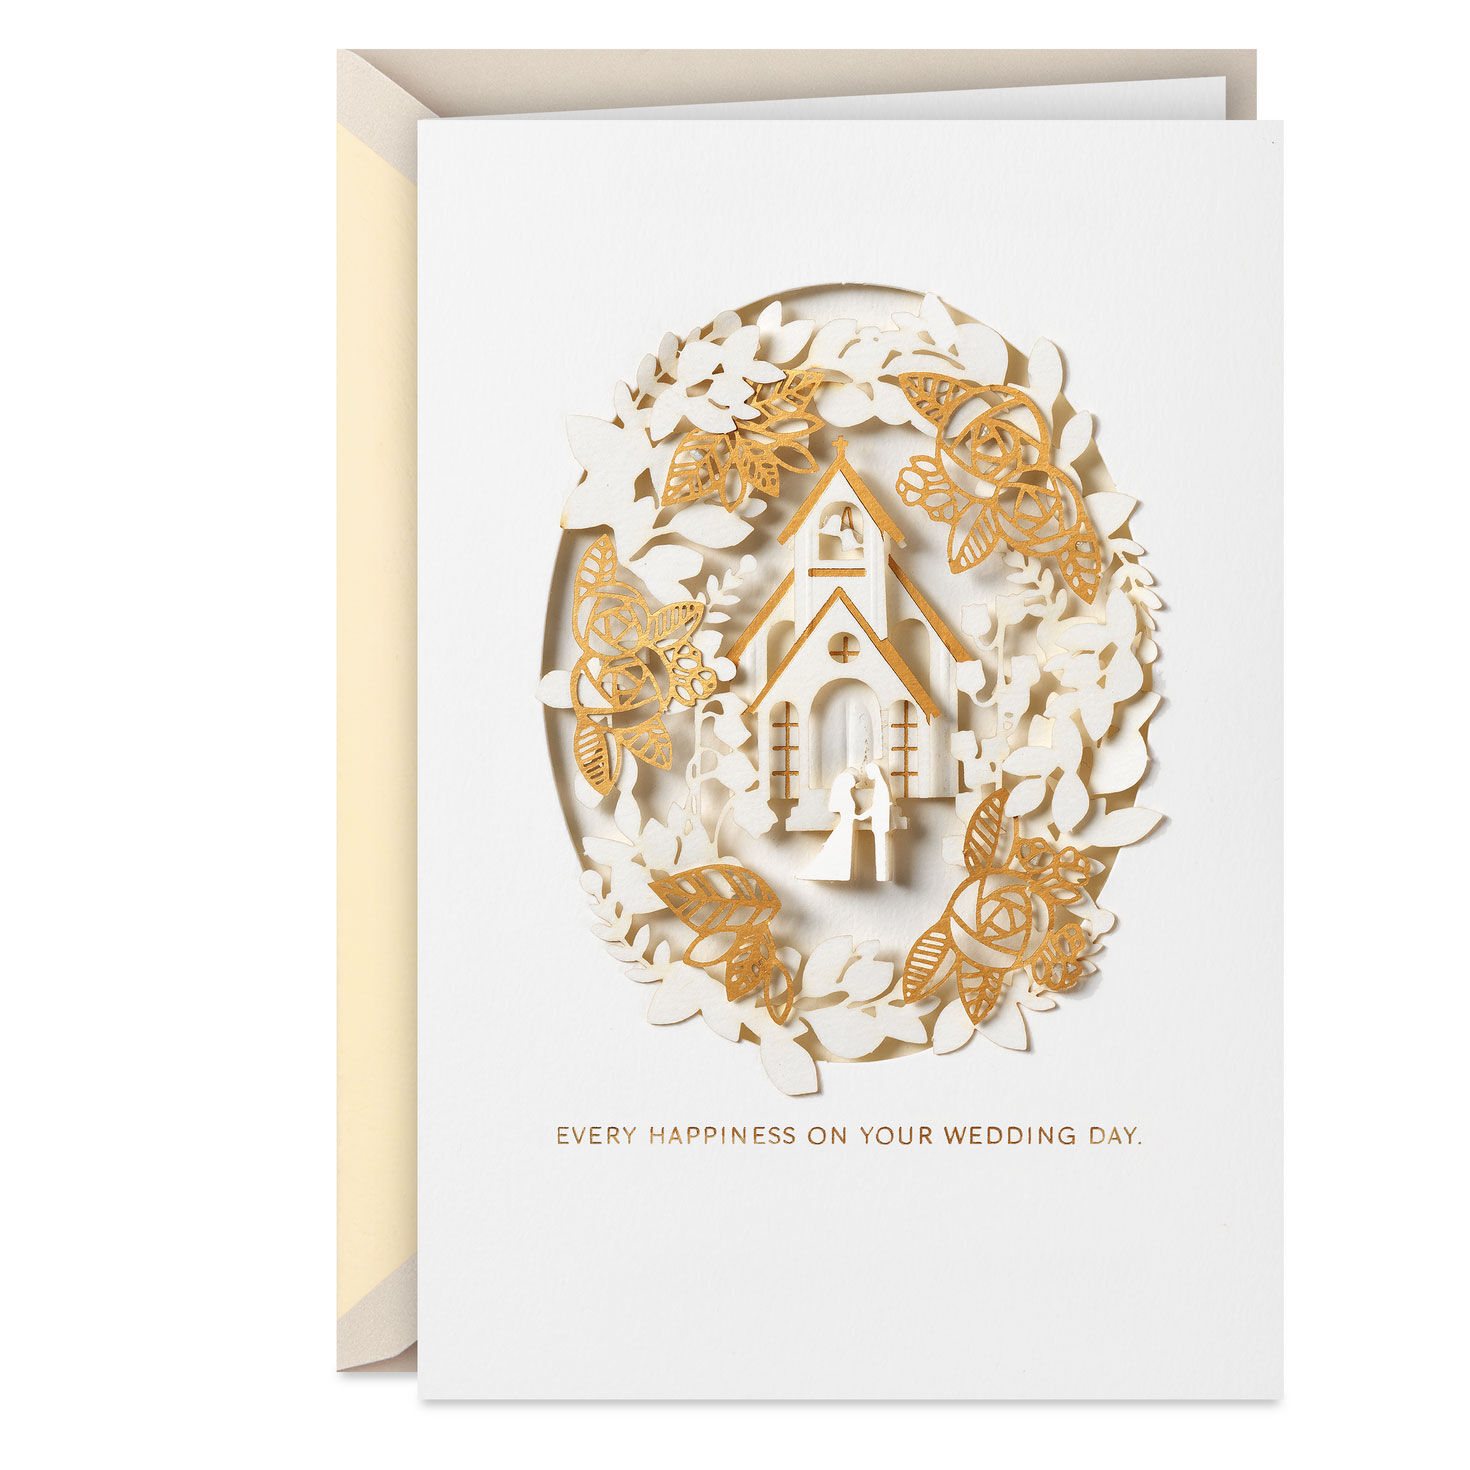 Every Happiness and Blessing Wedding Card for Couple for only USD 7.99 | Hallmark